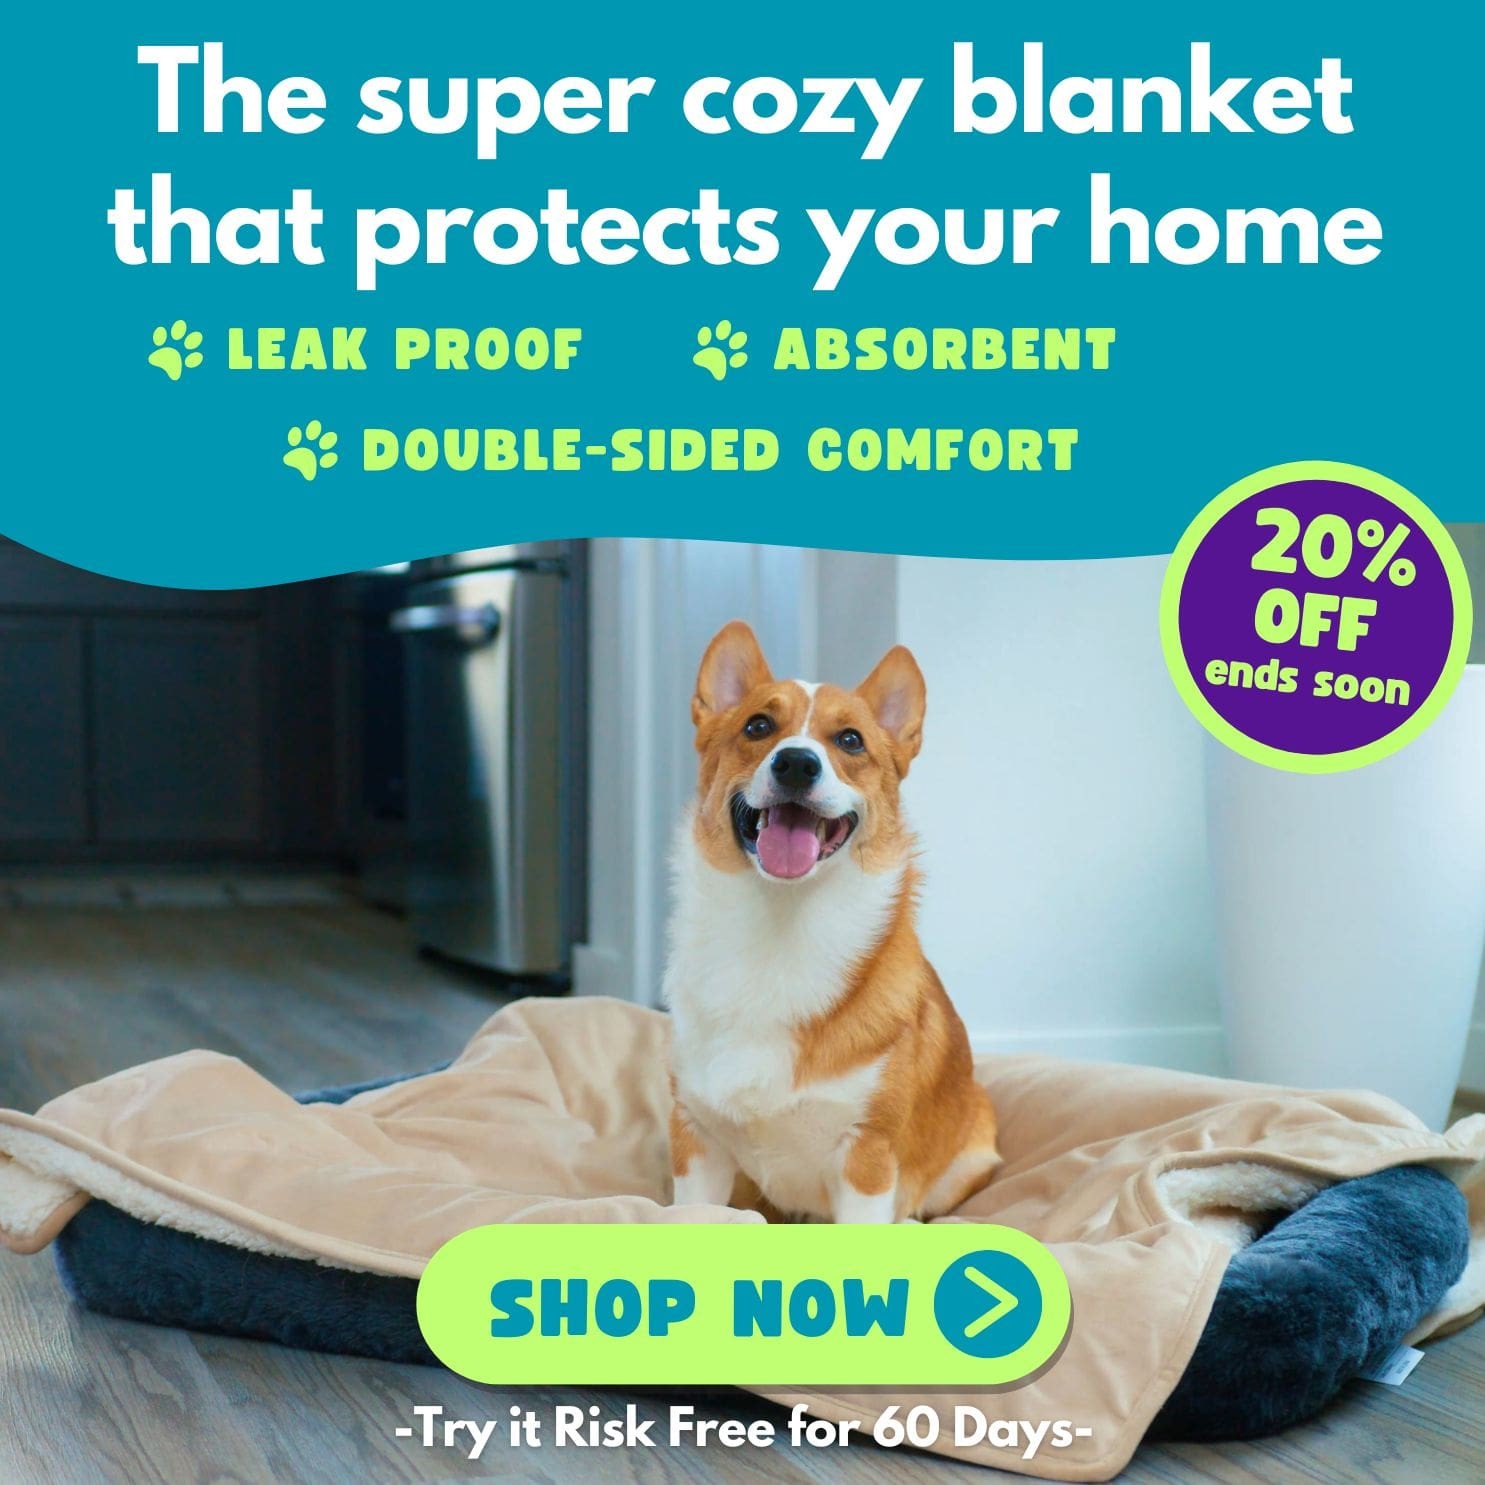 A square banner showing a corgi sitting on a blanket on the dog bed